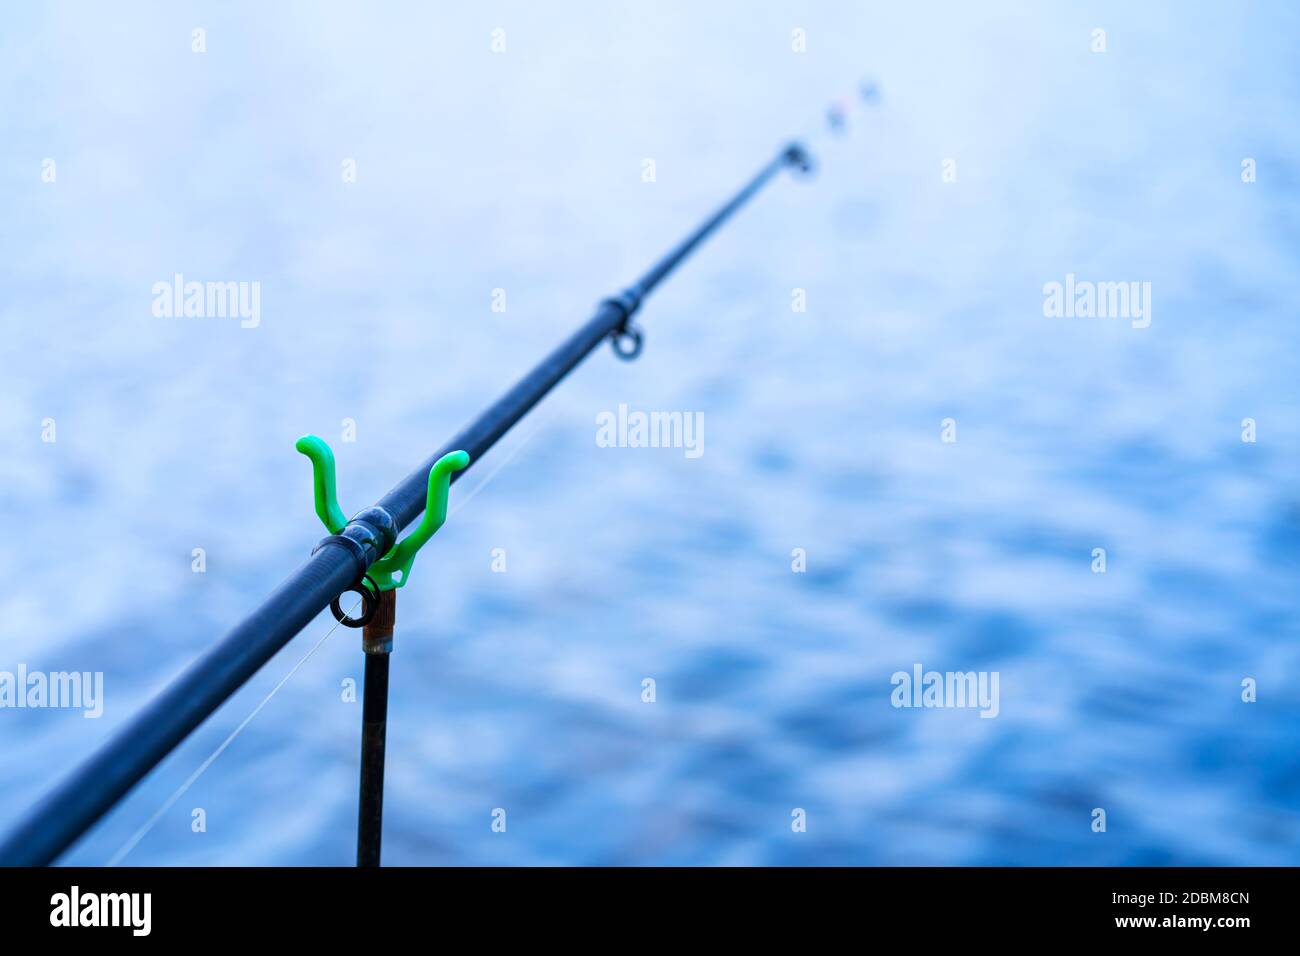 Jingle bell fish Cut Out Stock Images & Pictures - Alamy